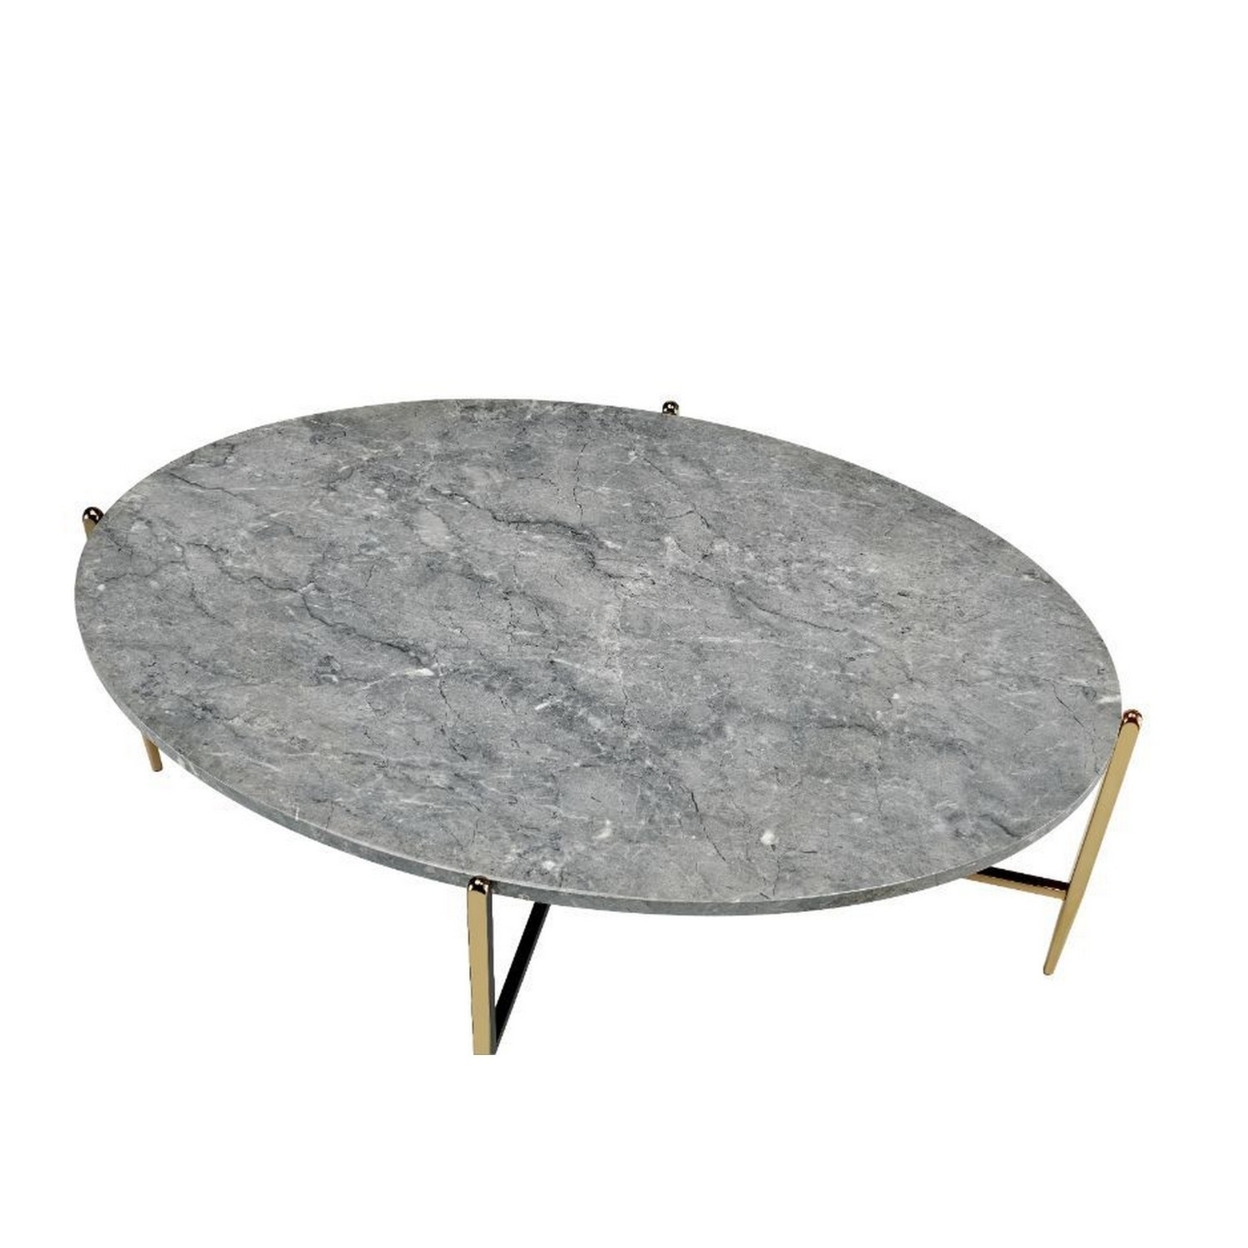 Coffee Table With Oval Marble Top And X Shaped Support, Gray And Gold- Saltoro Sherpi